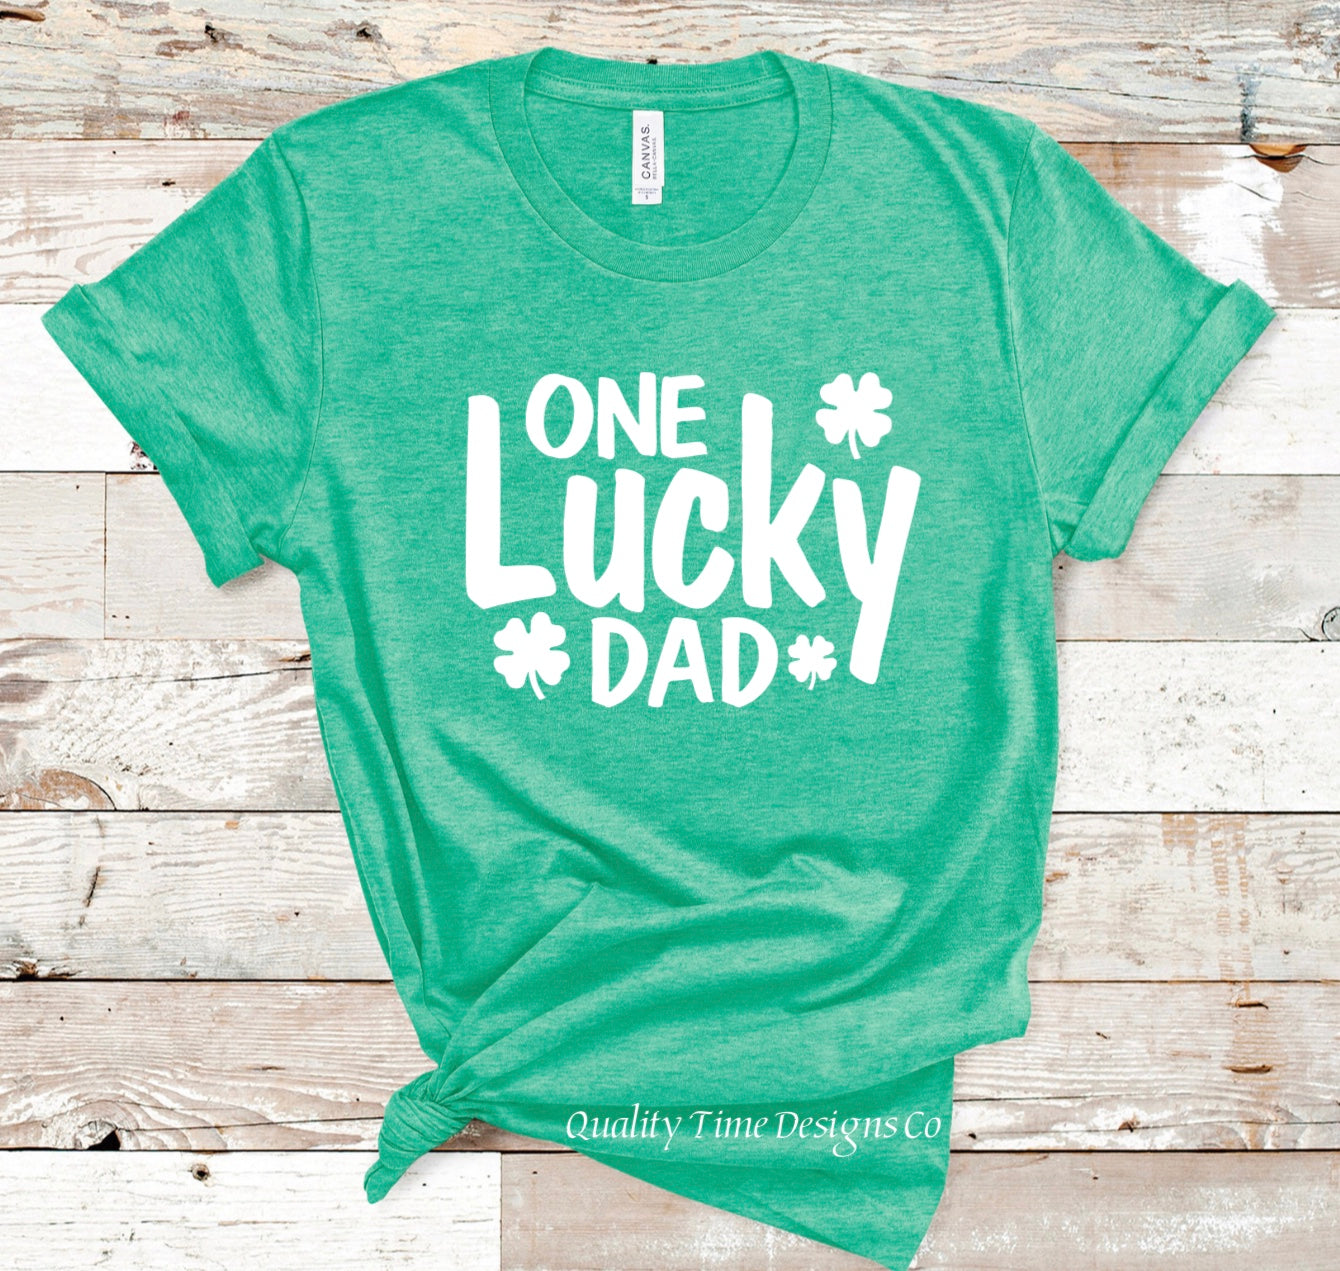 One lucky dad t-shirt 